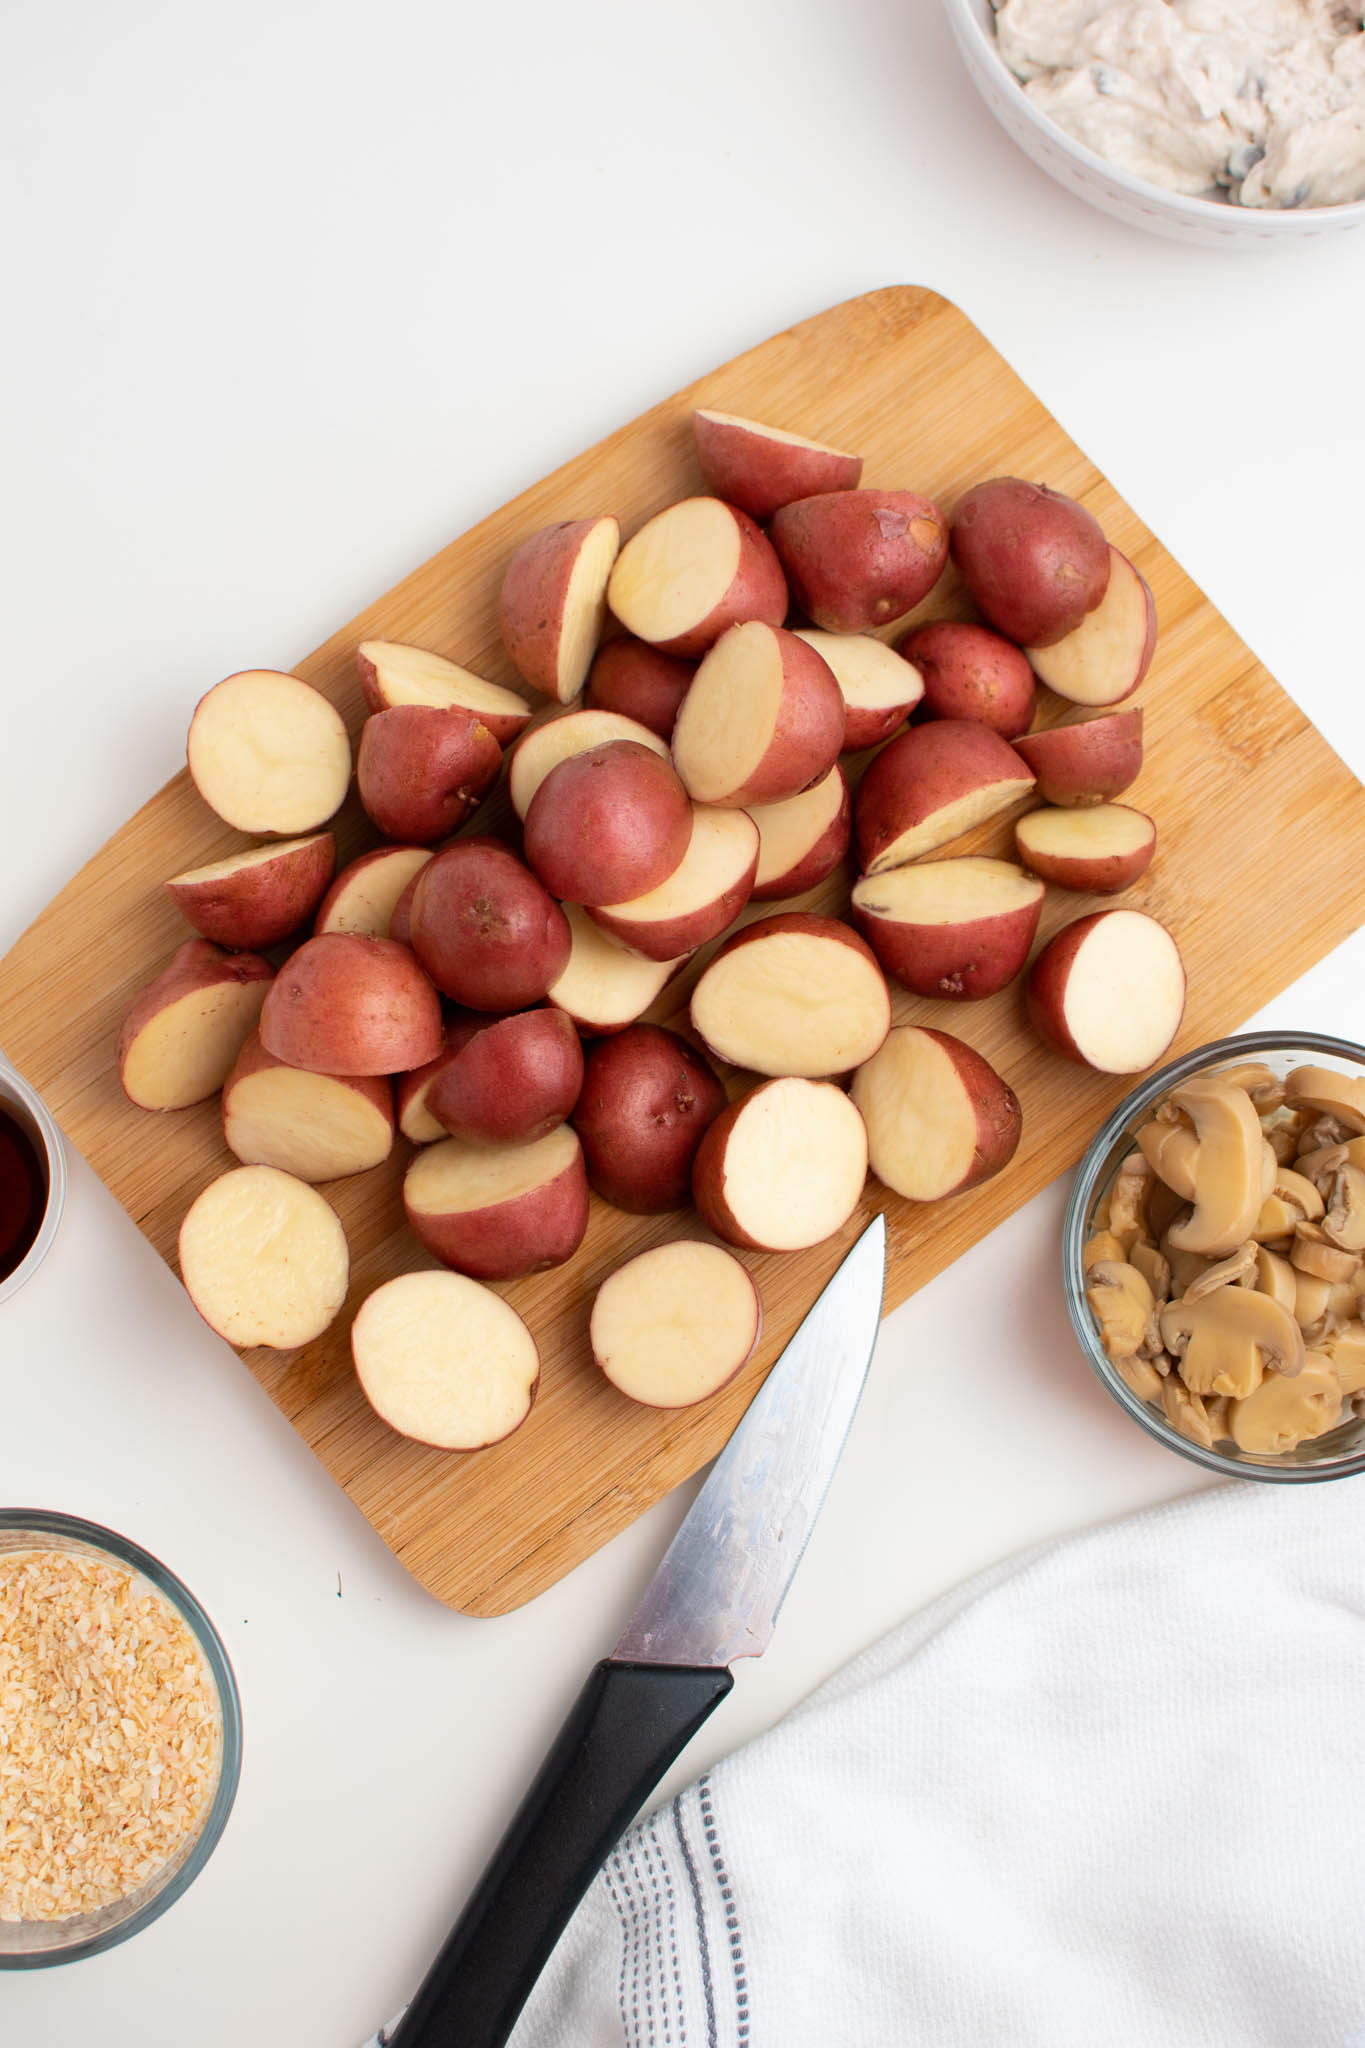 Several cut red potatoes on wood cutting board with bowls of ingredients nearby.